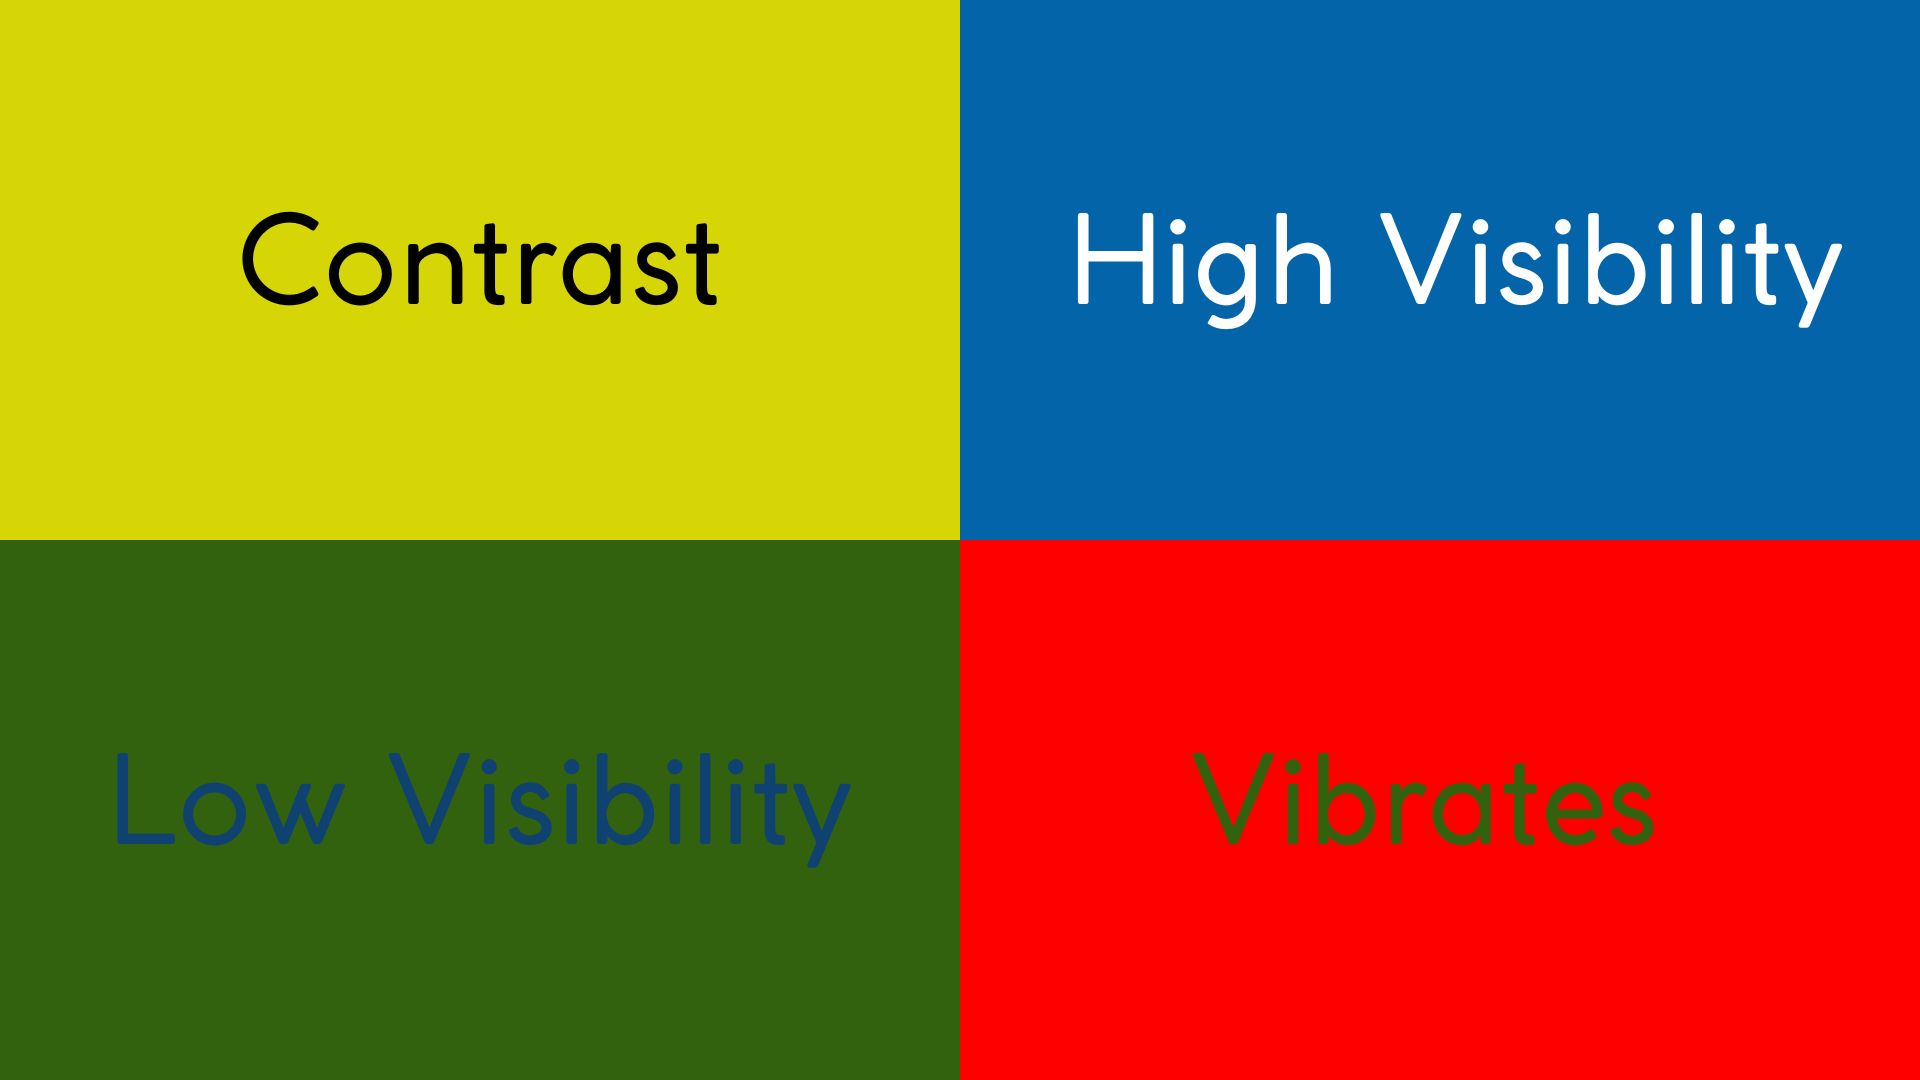 Four quadrants that demonstrates high and low colour visibility. The first box is yellow with black text that reads Contrast. The next box is blue with white text that says High Visibility. The third box is green with blue text that says Low Visibility. The fourth box is red with green text that says vibrates.